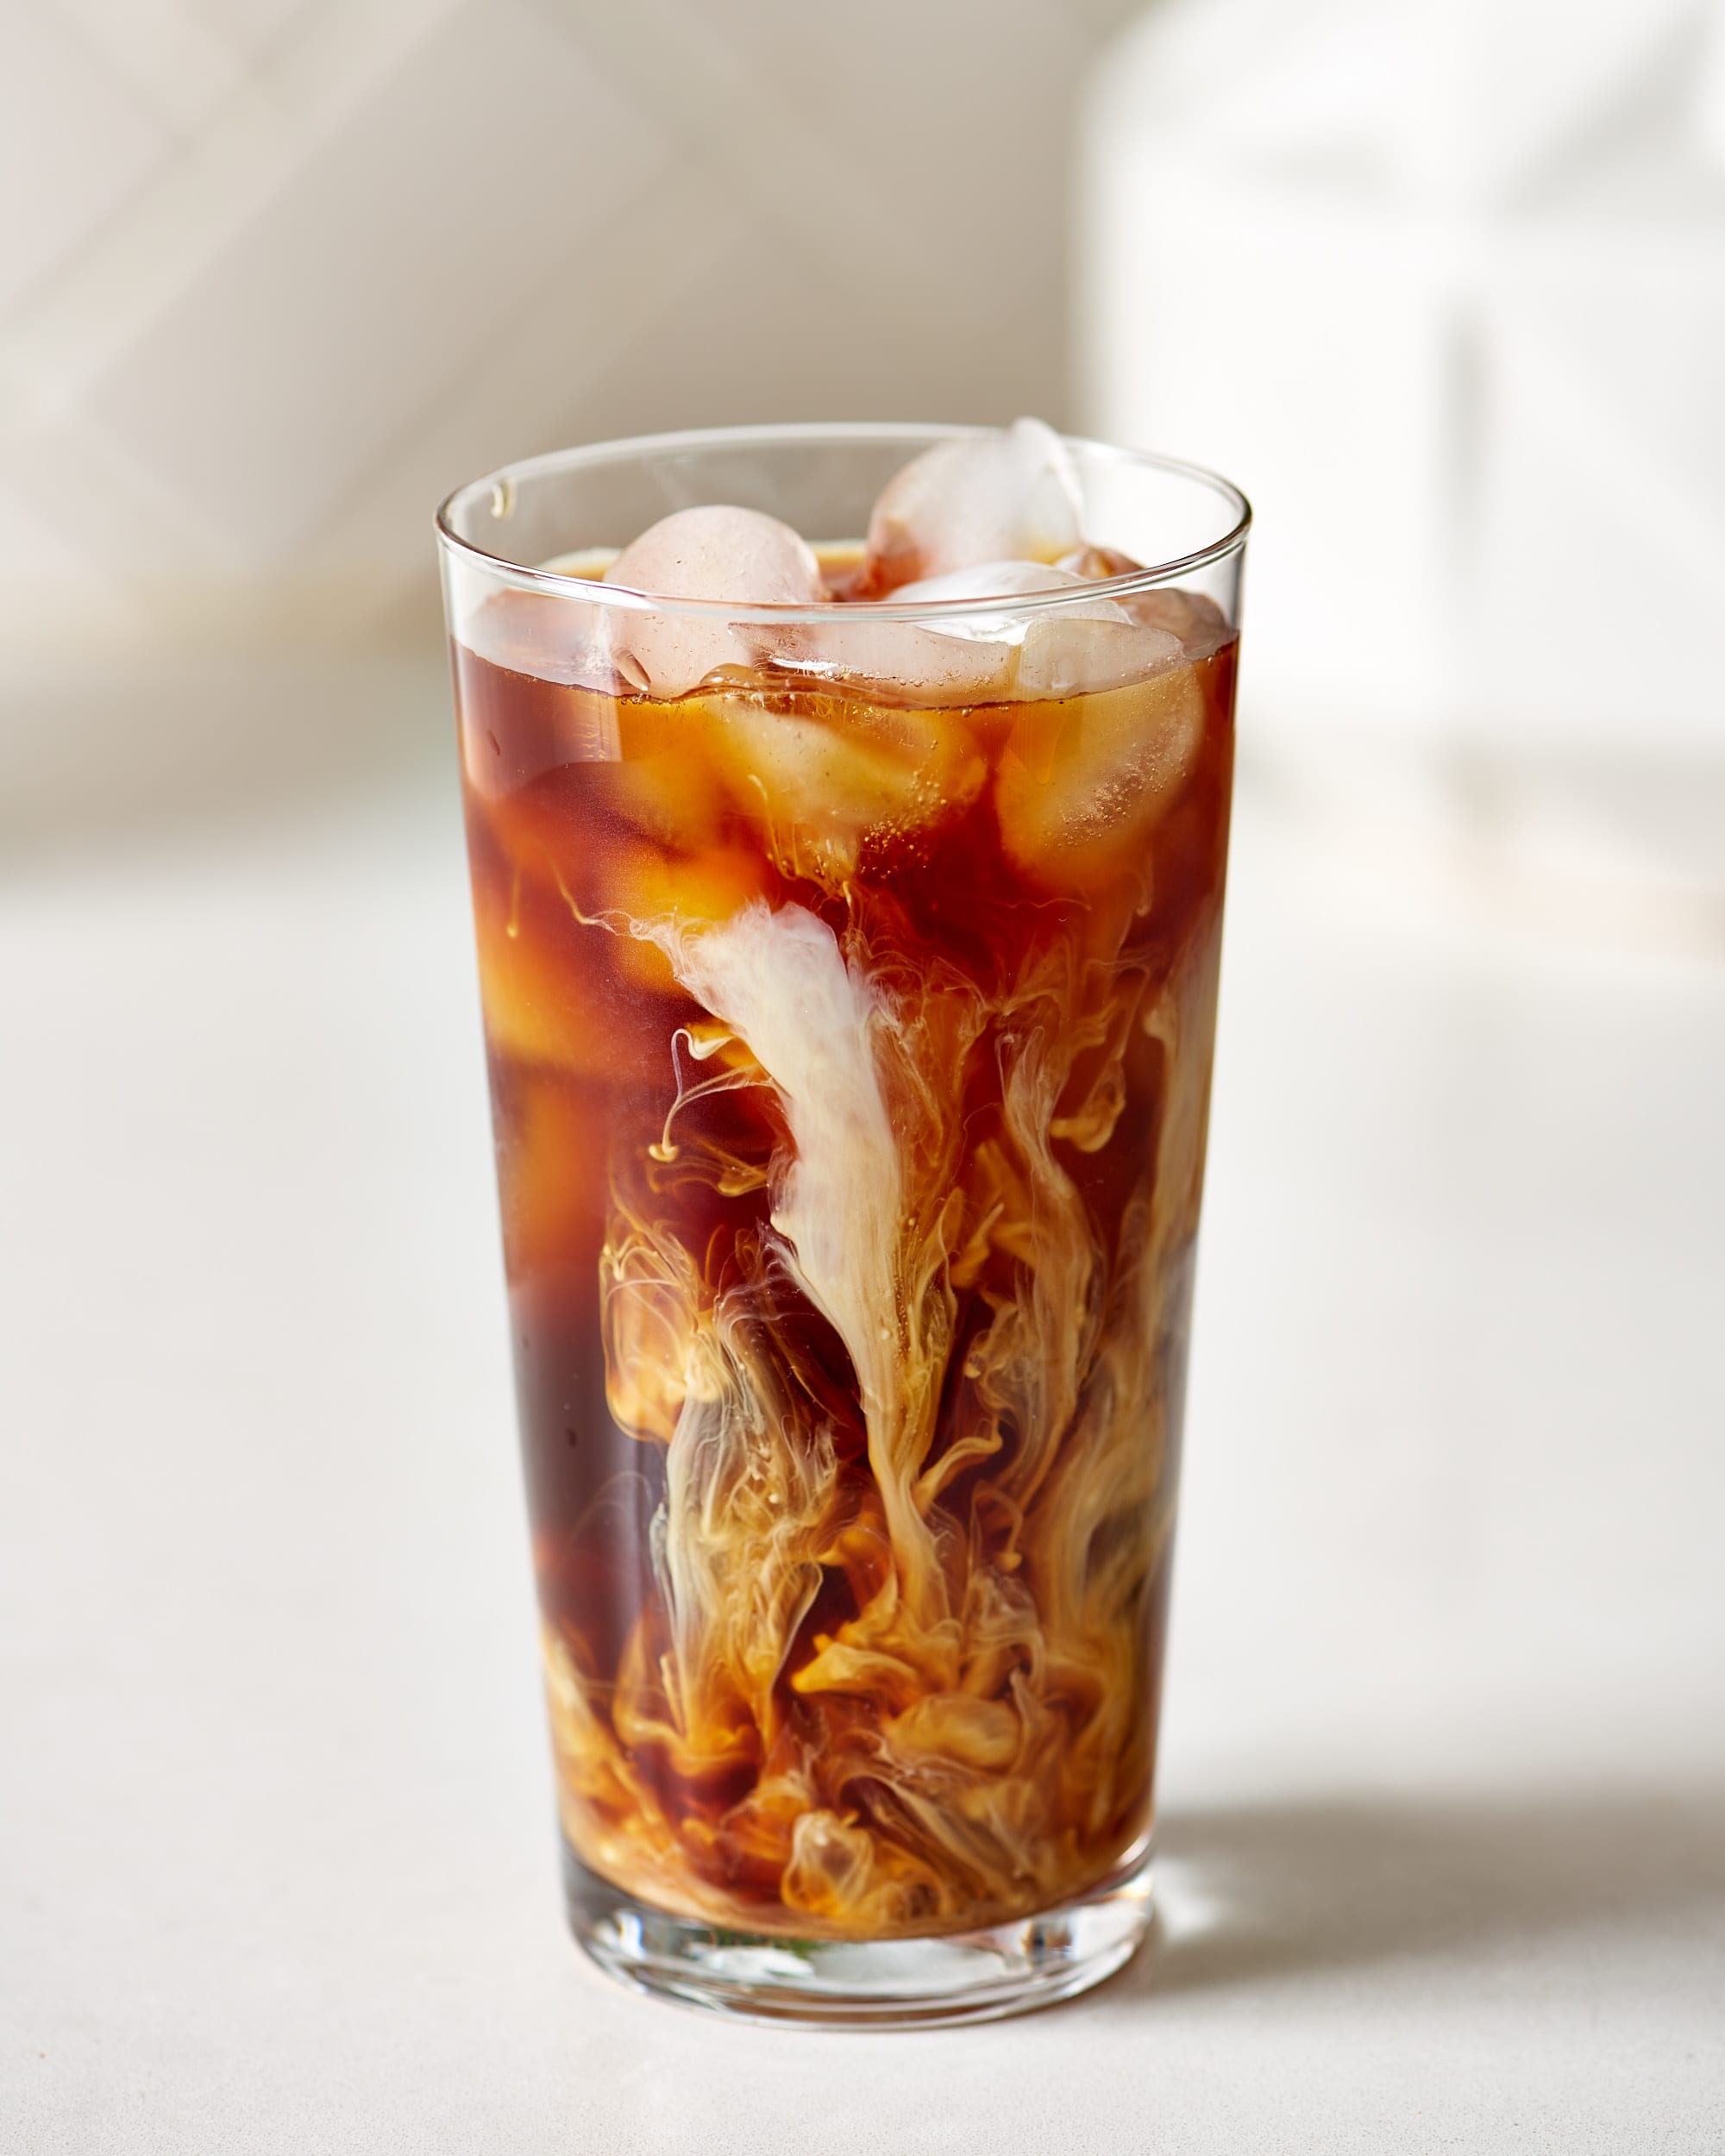 Cool And Sweeten Your Iced Coffee At The Same Time With This Tip